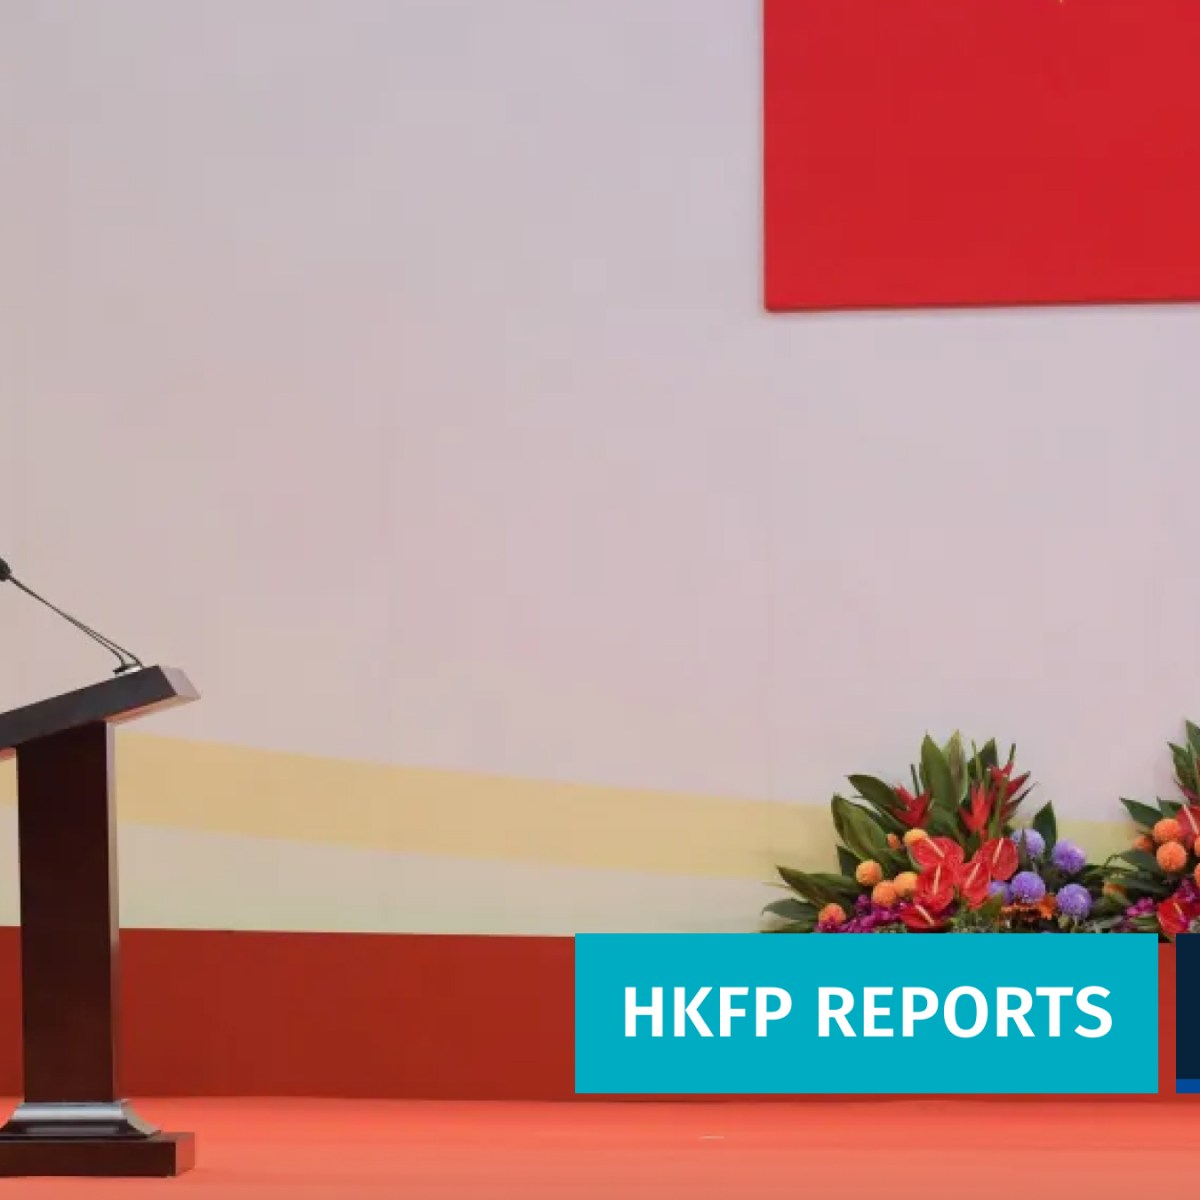 5 years of Hong Kong under Carrie Lam – how many promises have been kept?